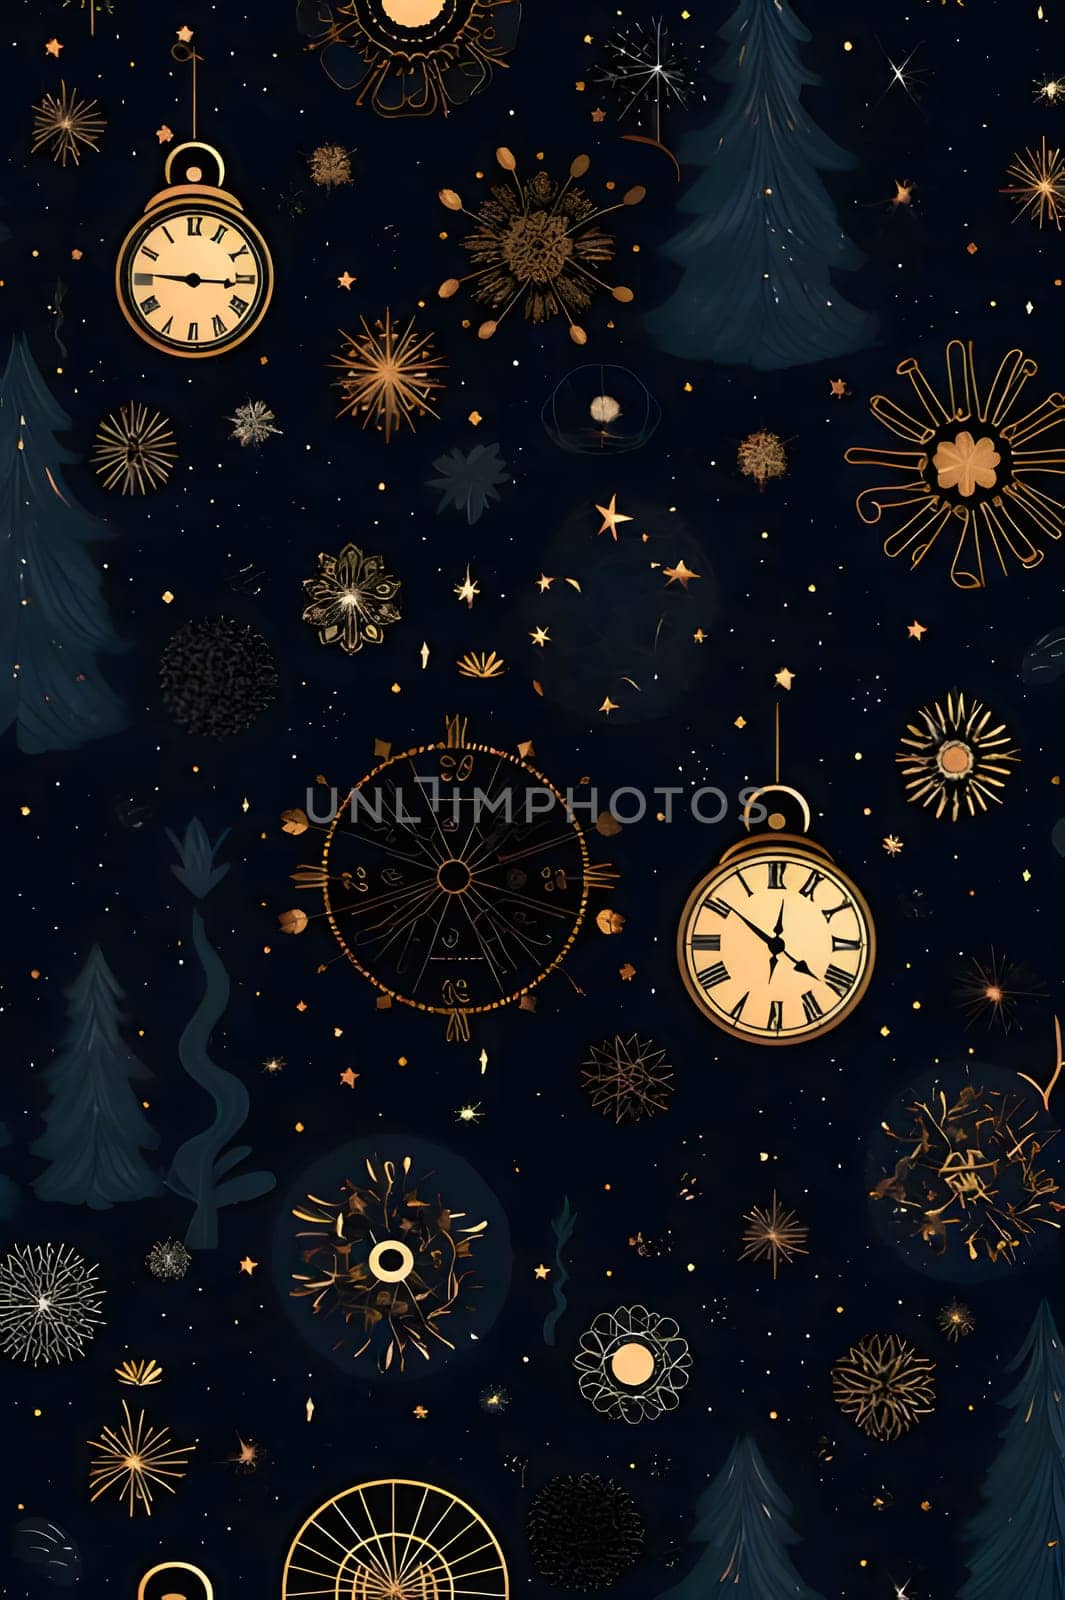 Elegant and modern. Clock faces and Christmas tree plants. as abstract background, wallpaper, banner, texture design with pattern - vector. Dark colors.